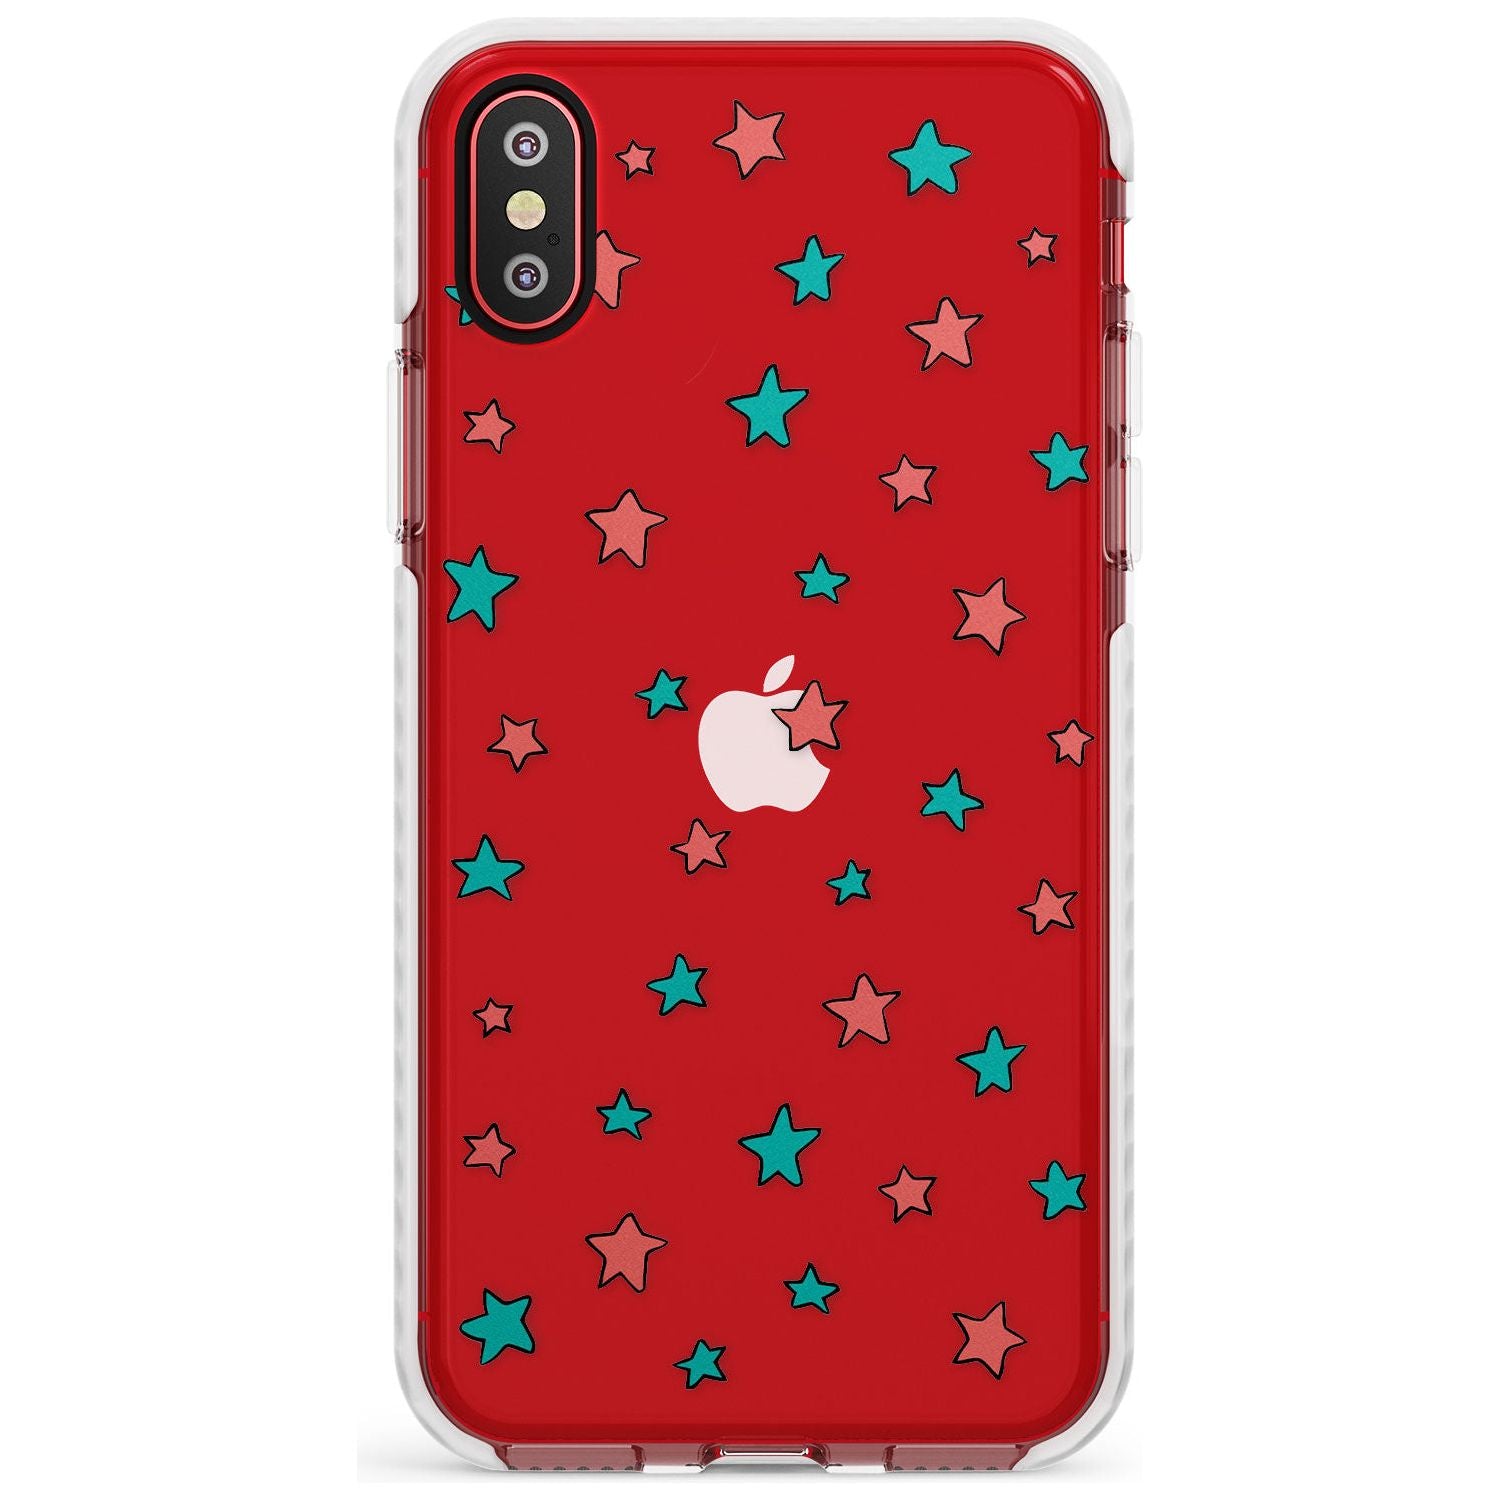 Heartstopper Stars Pattern Impact Phone Case for iPhone X XS Max XR